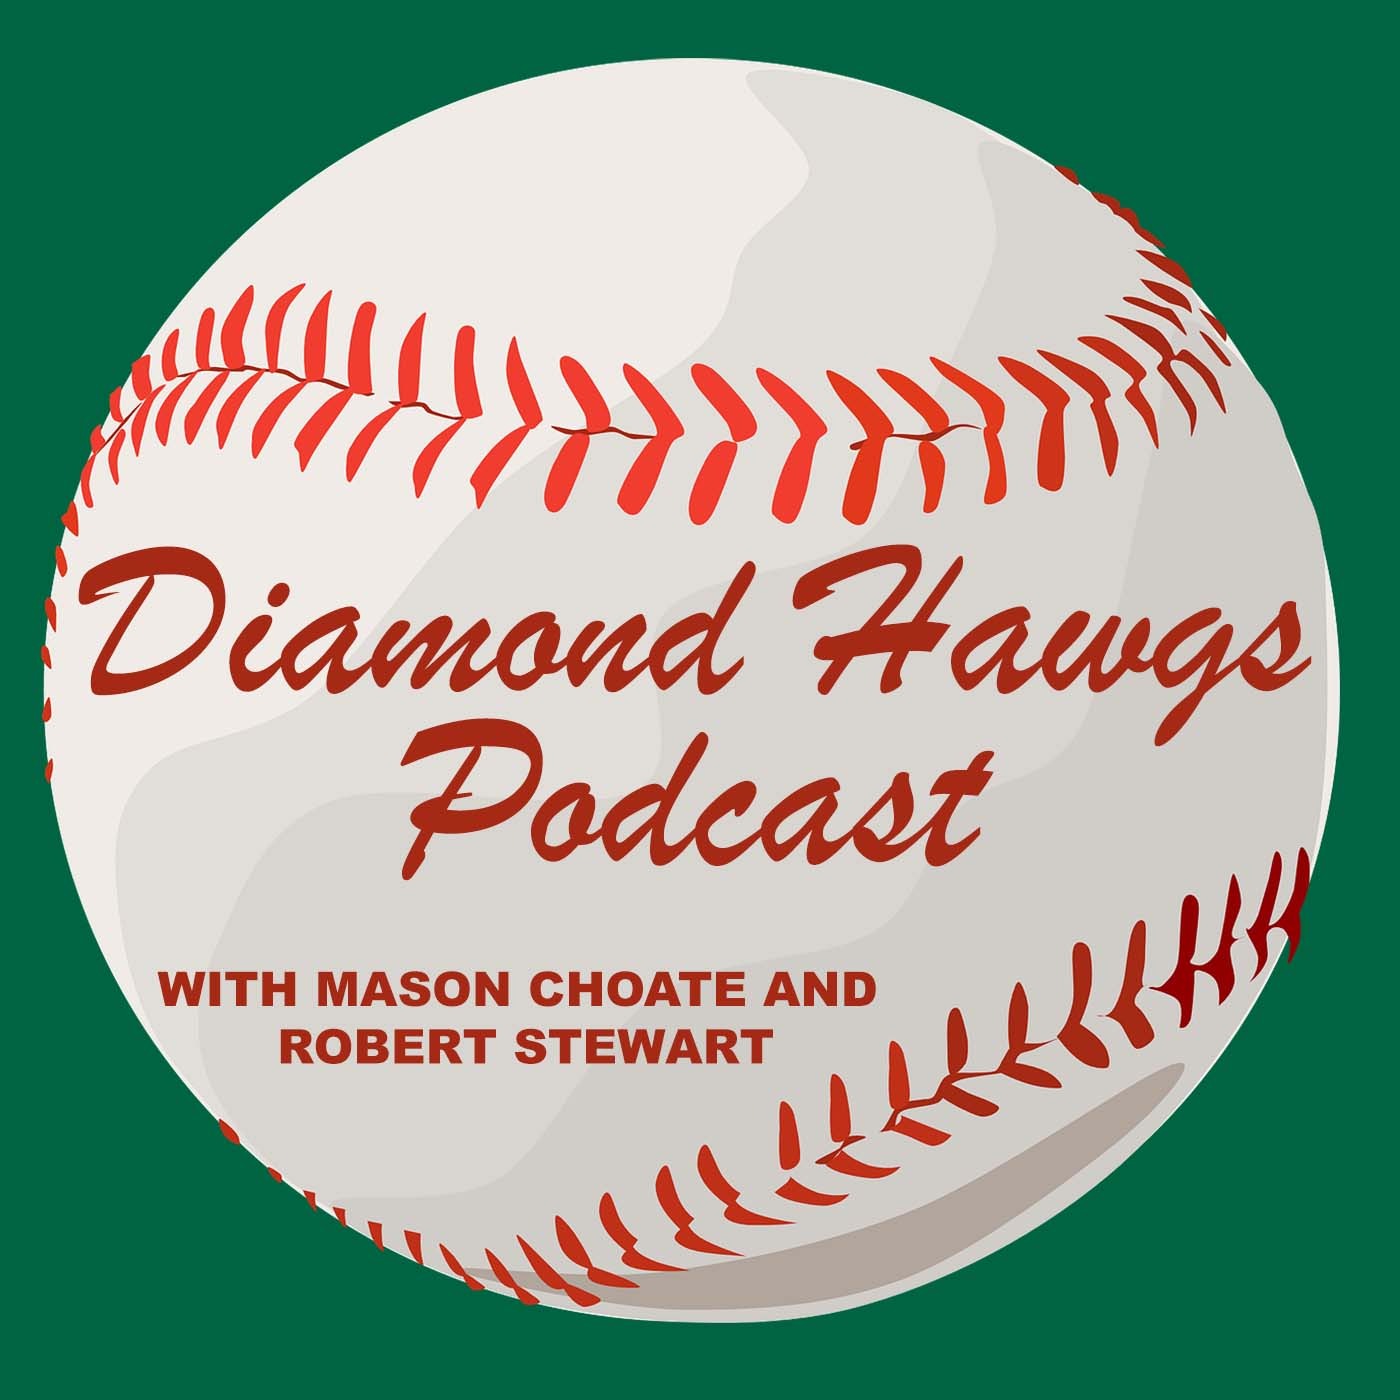 Diamond Hawgs Podcast: No. 1 Arkansas sweeps Ole Miss, improves to 11-1 in SEC play